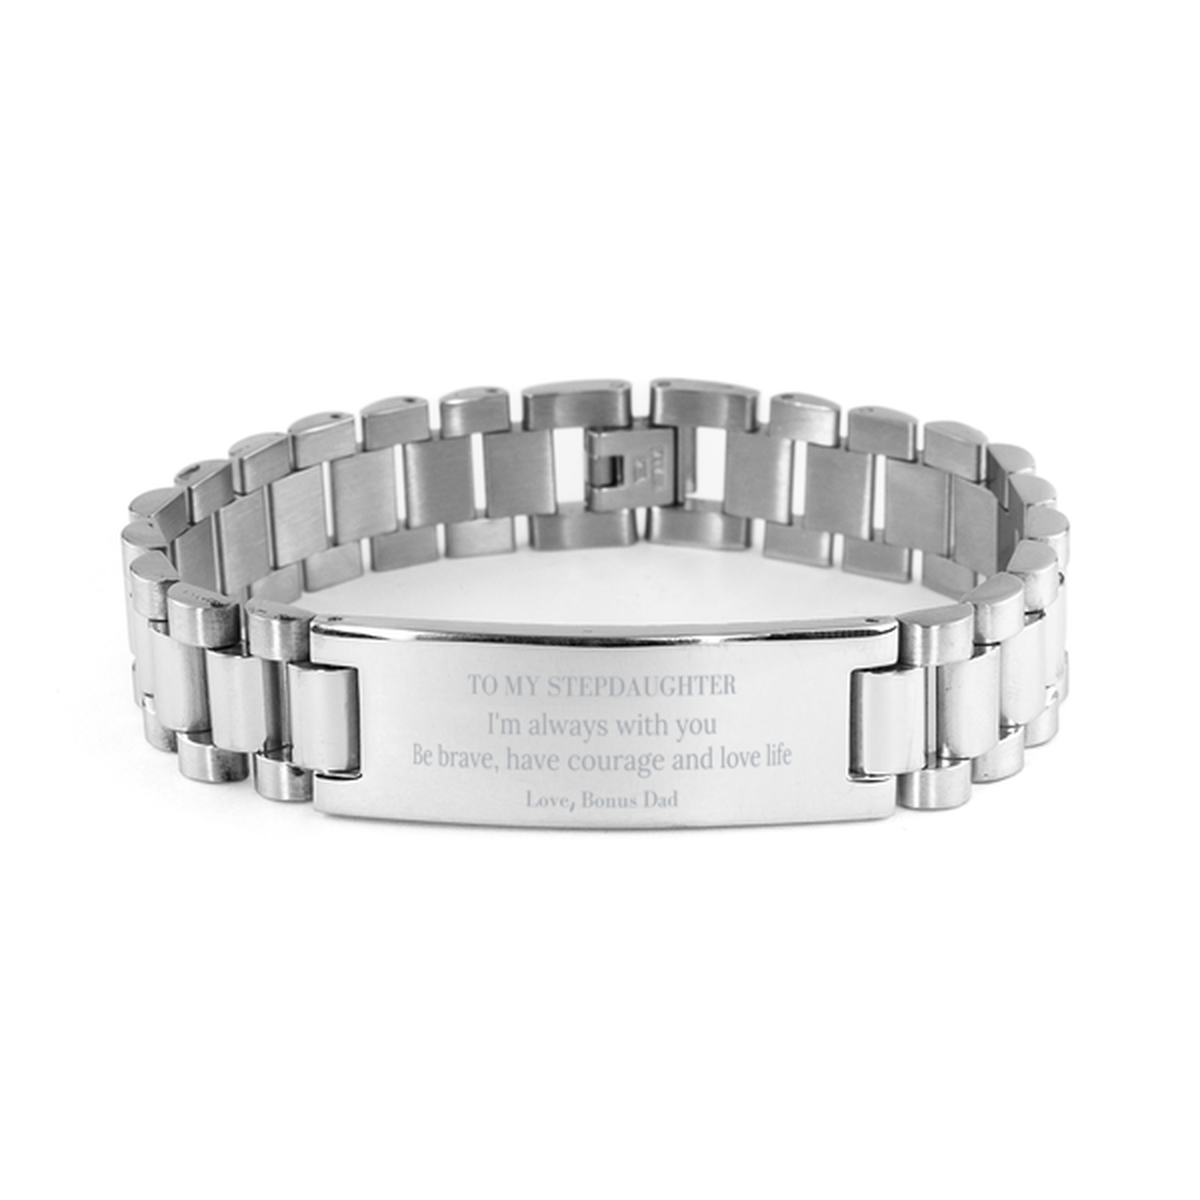 To My Stepdaughter Gifts from Bonus Dad, Unique Ladder Stainless Steel Bracelet Inspirational Christmas Birthday Graduation Gifts for Stepdaughter I'm always with you. Be brave, have courage and love life. Love, Bonus Dad